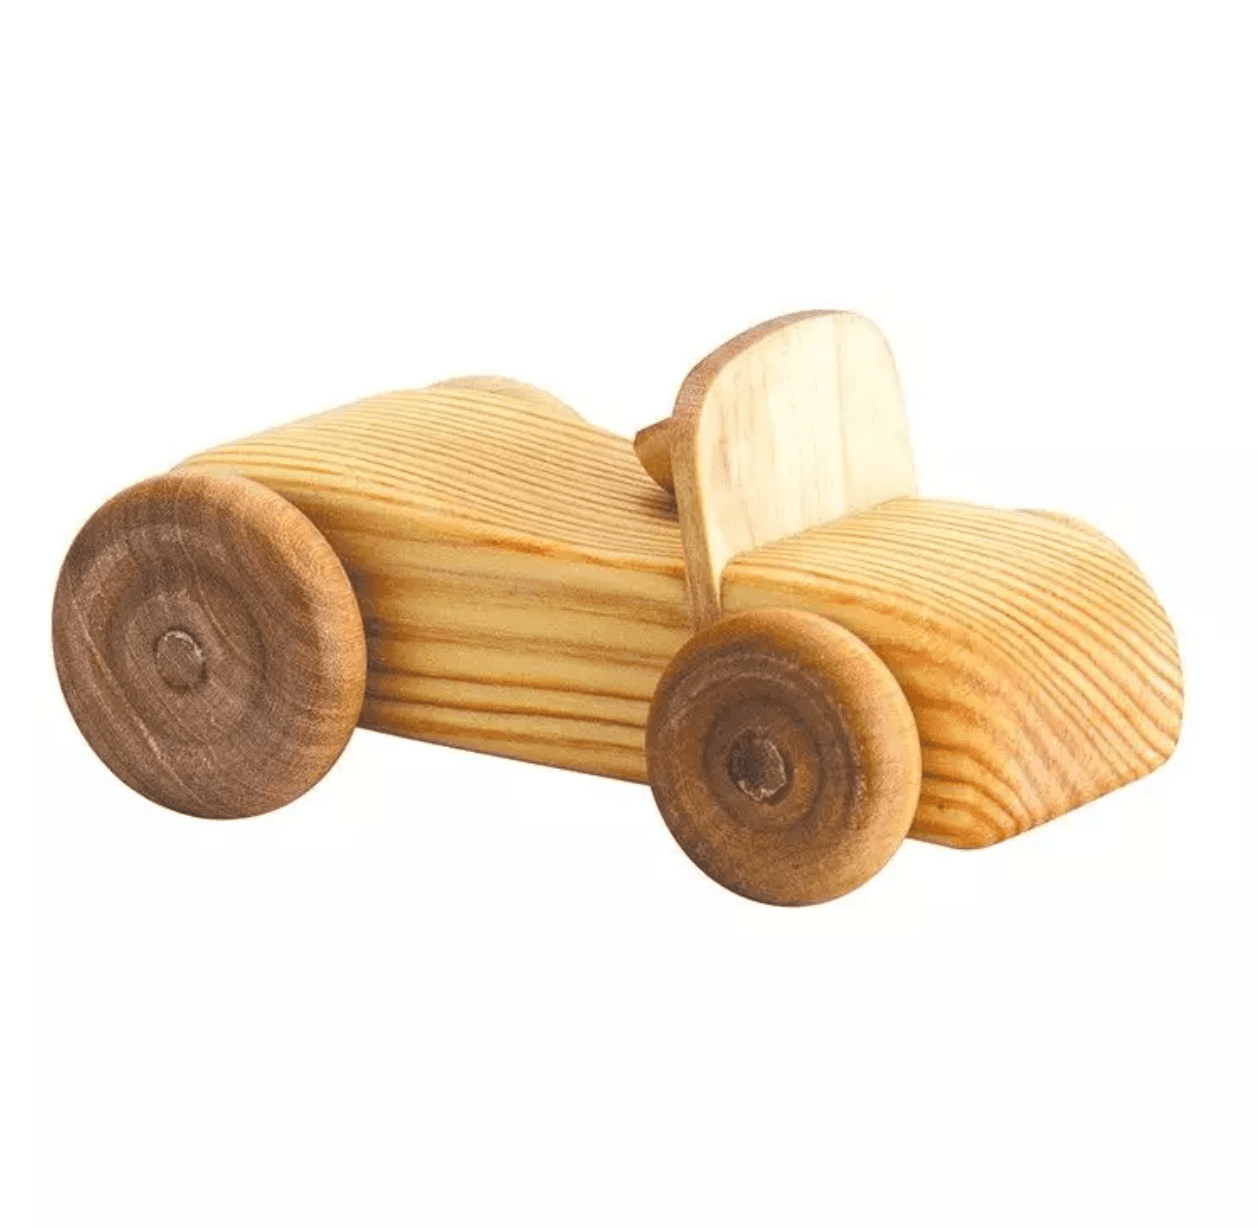 Debresk - Wooden Toy Cabriolet/Convertible Small - Why and Whale